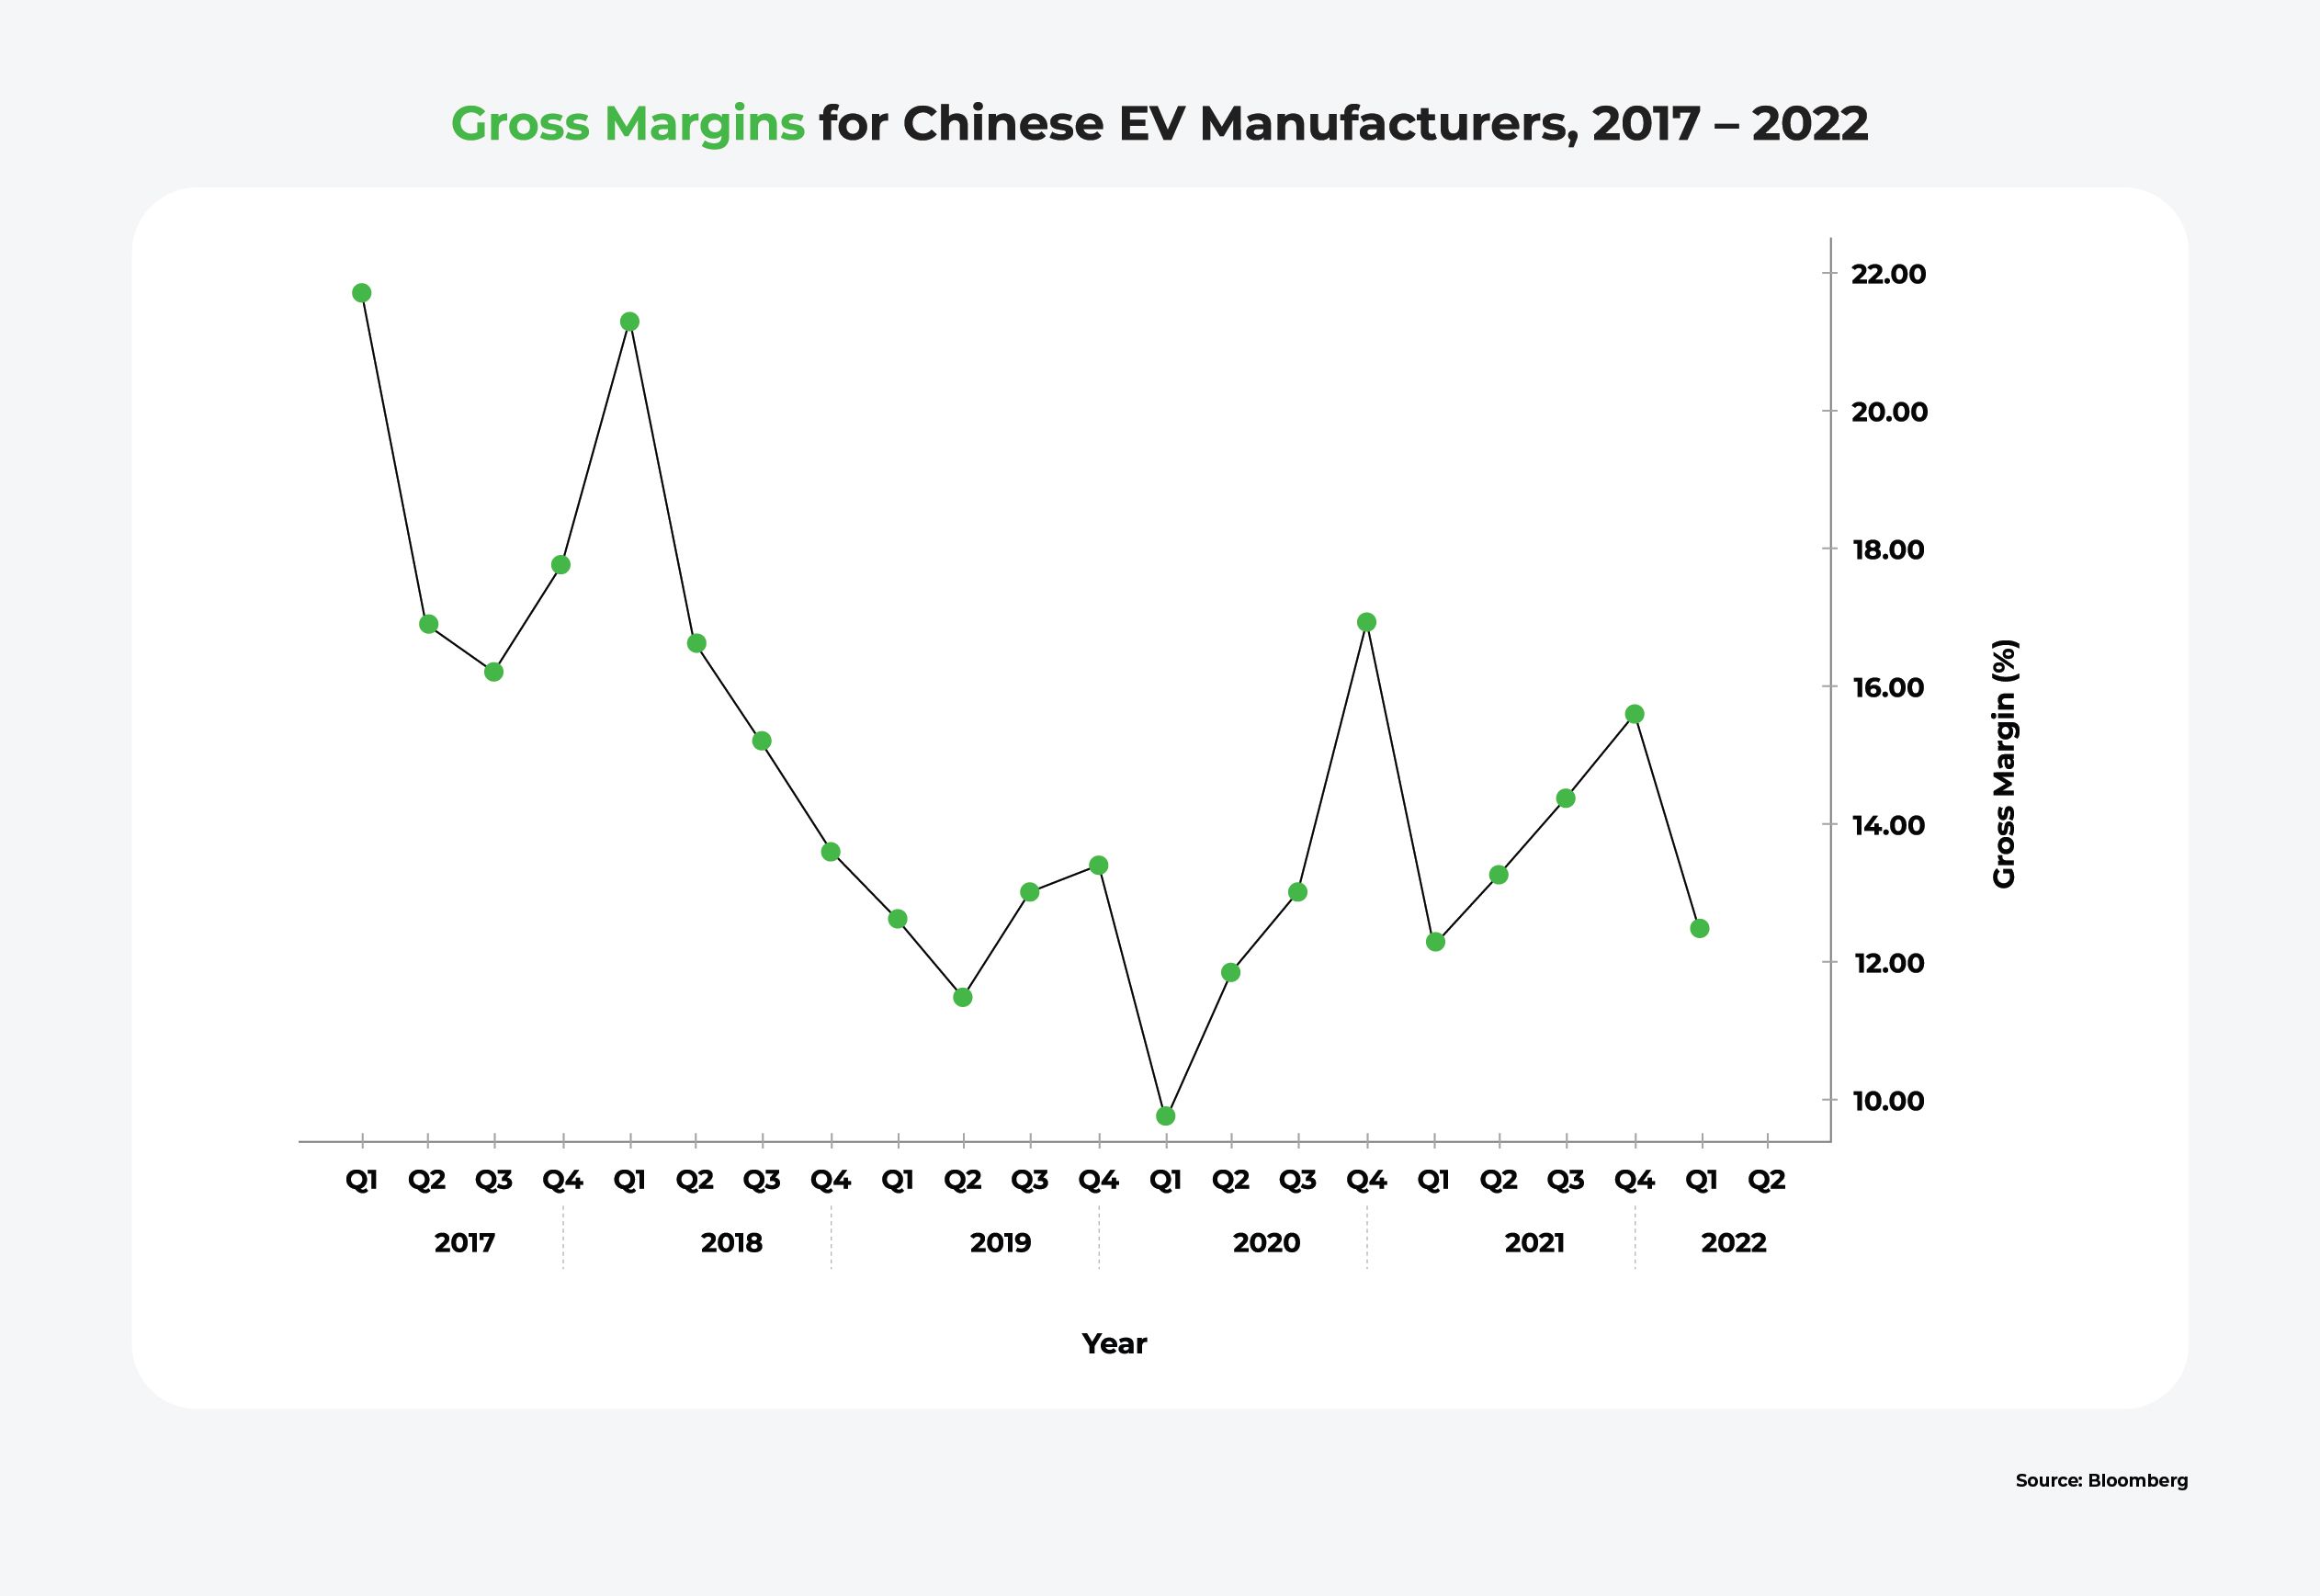 A graph showing gross margins for Chinese EV brands between 2017 and 2022